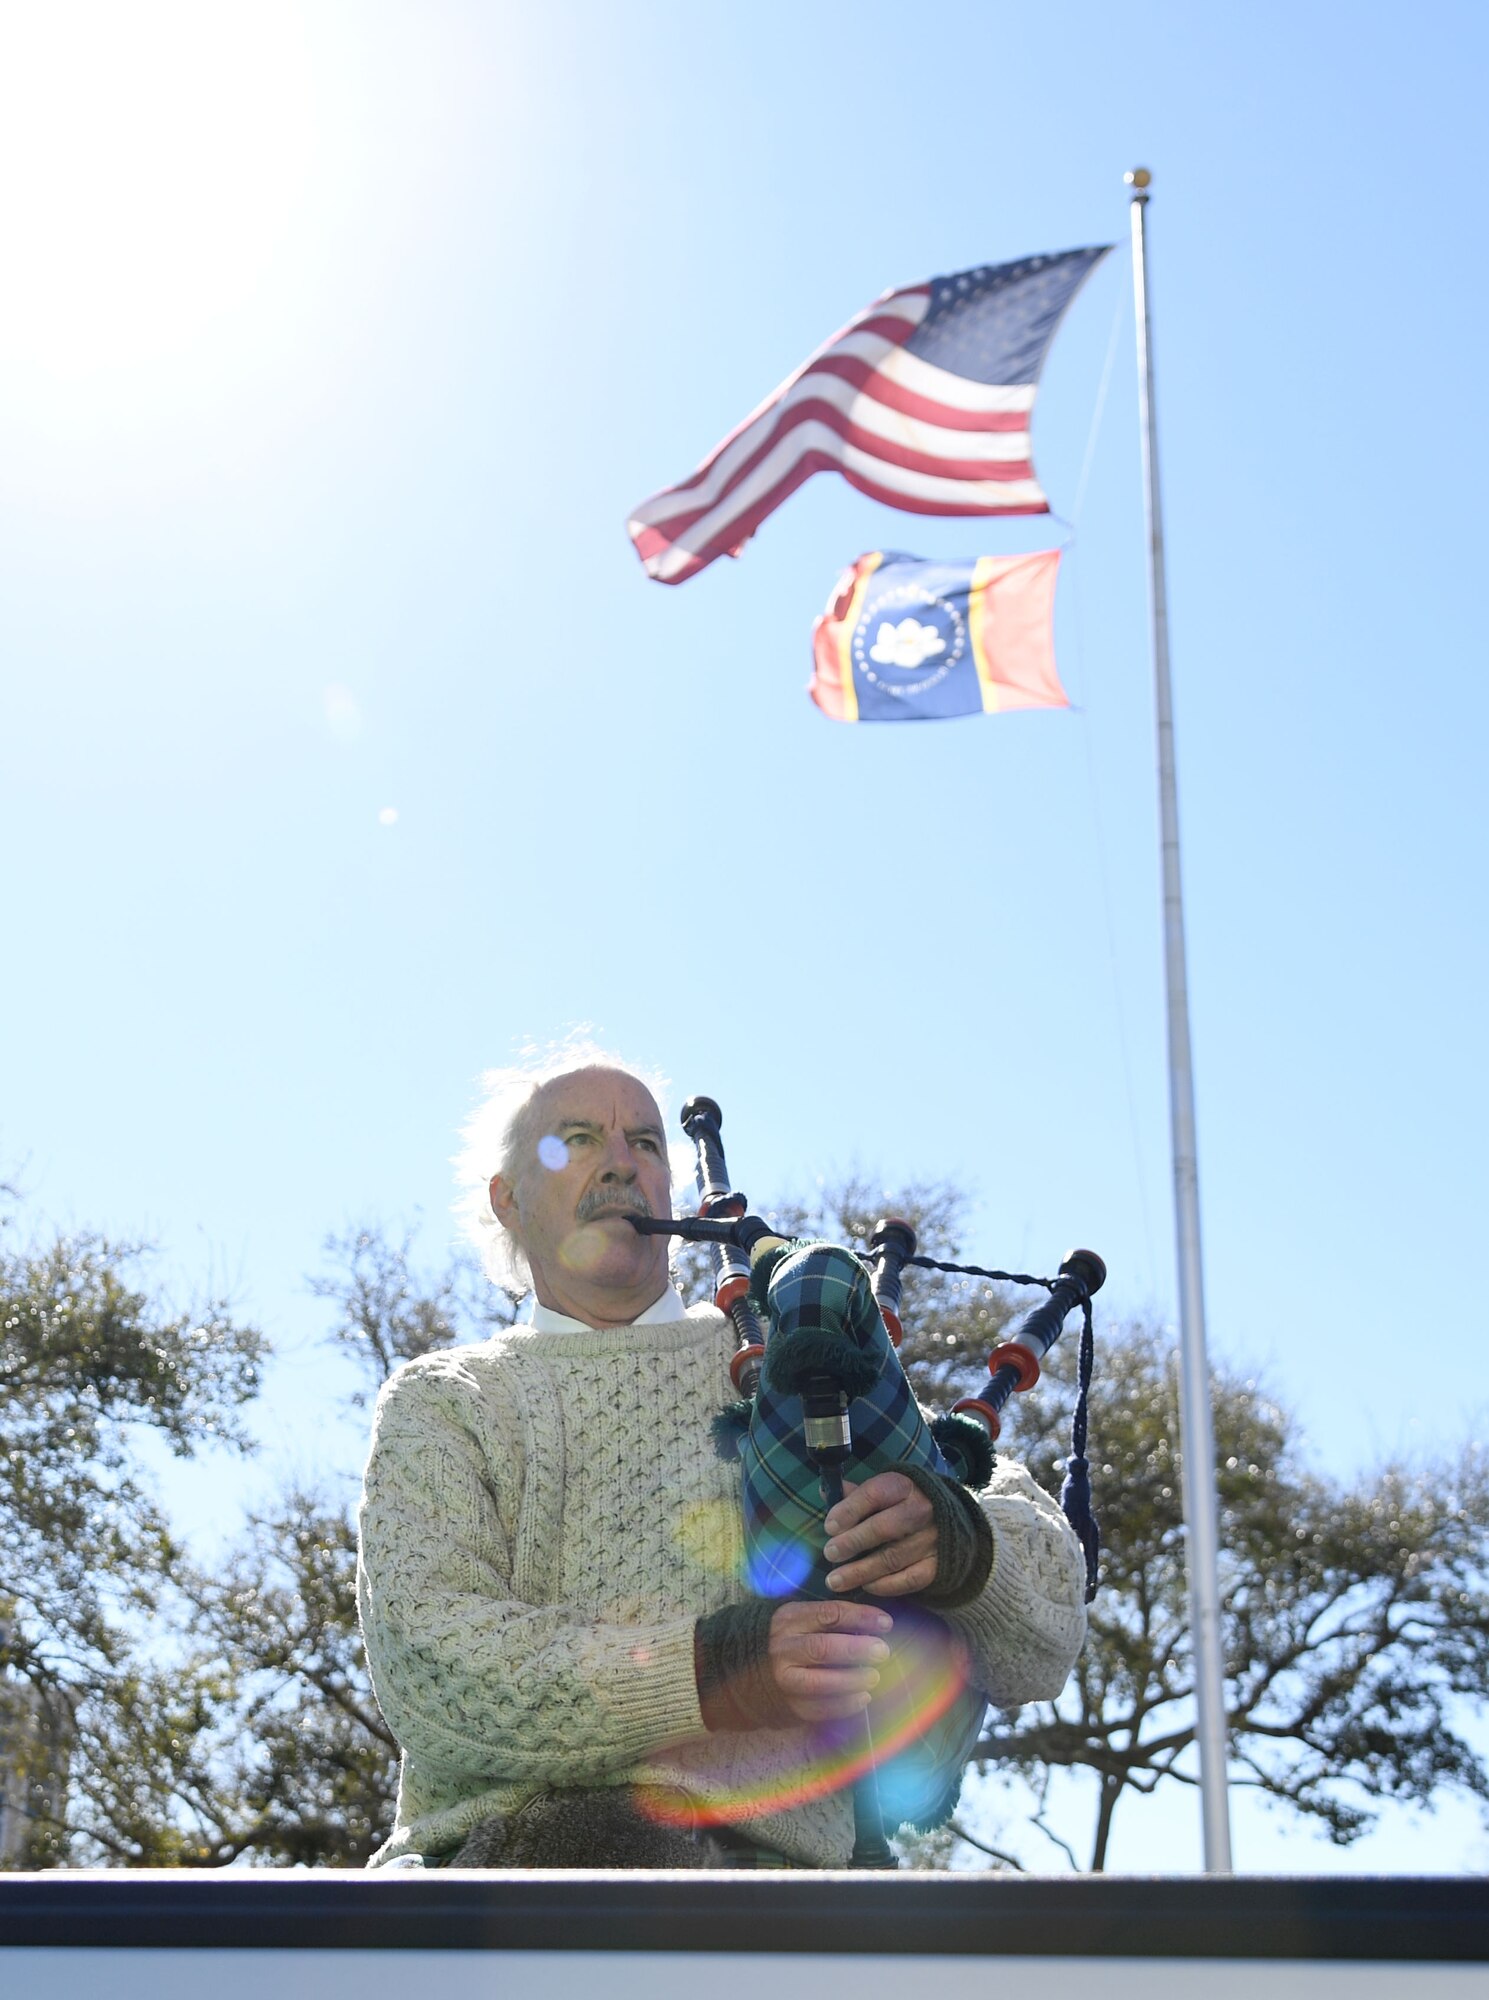 A bag pipe player performs during the Hibernia Marching Society of Mississippi St. Patrick's Day Parade in Biloxi, Mississippi, March 12, 2022. Keesler personnel participated in the local parade to show their support of the communities surrounding the installation. (U.S. Air Force photo by Kemberly Groue)